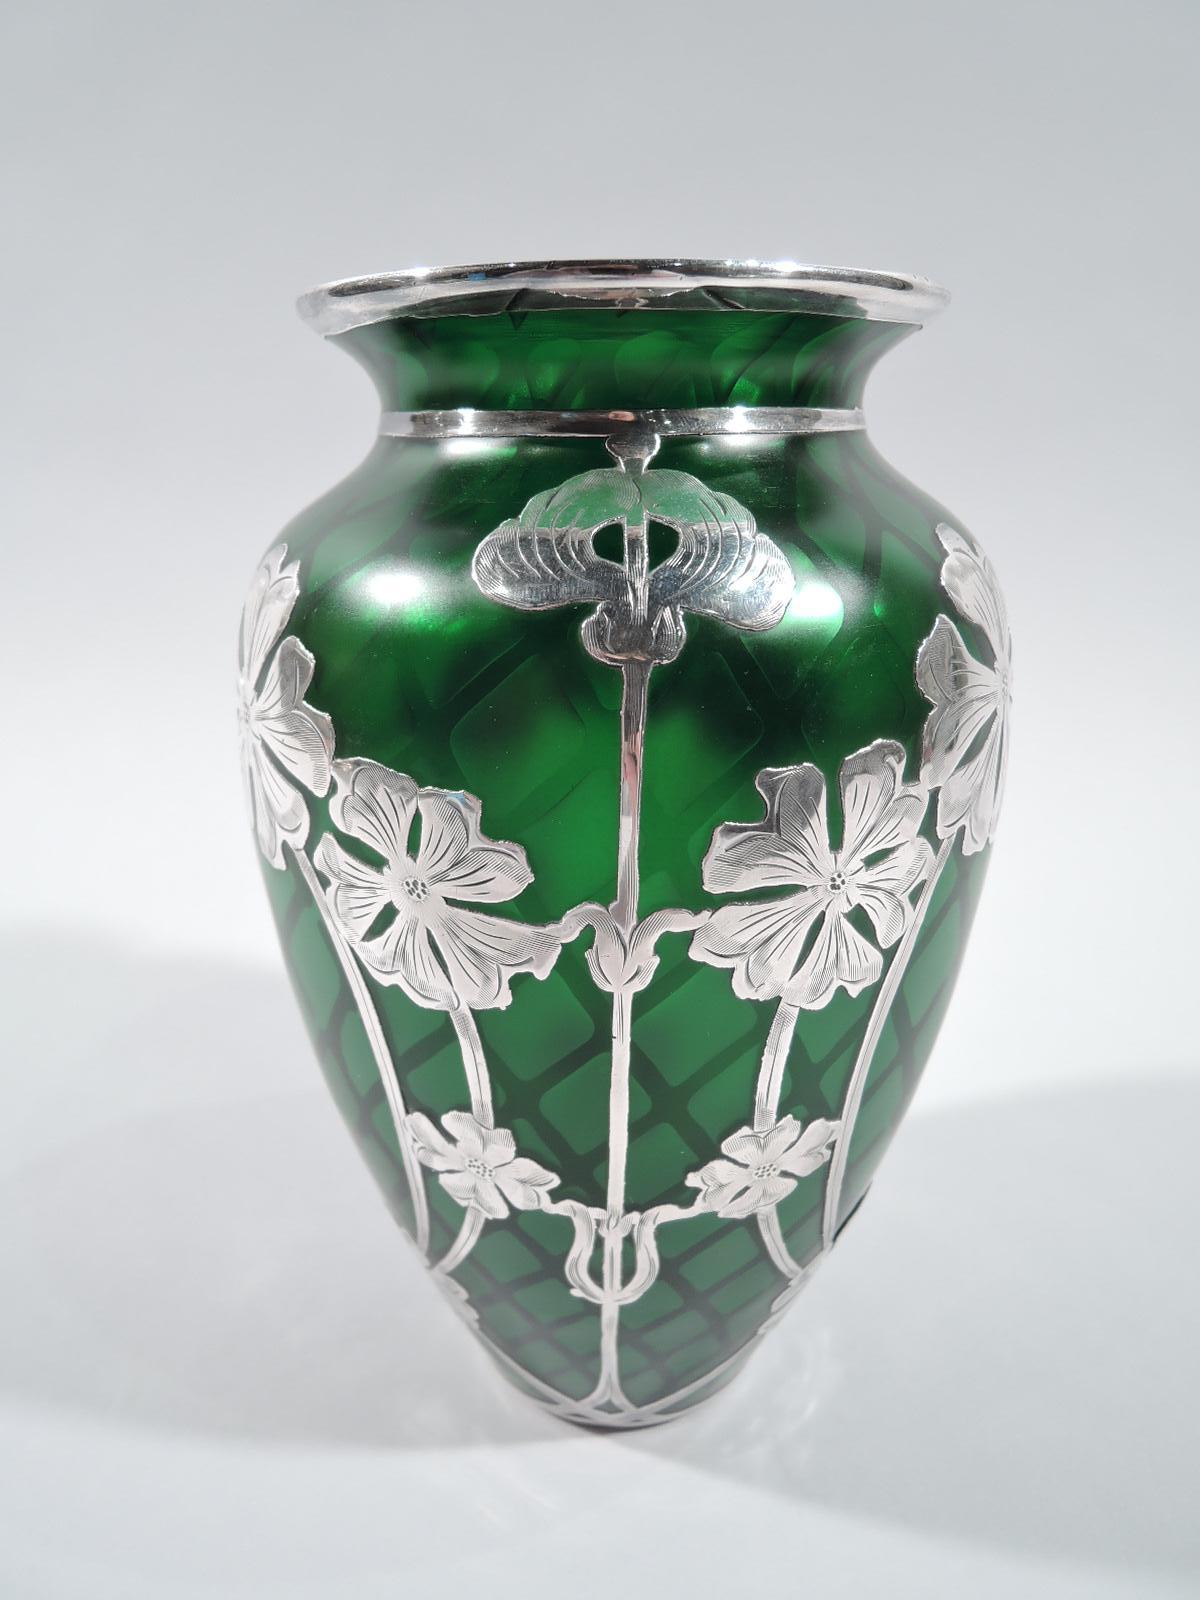 Stunning turn-of-the-century quilted glass vase by historic Loetz with engraved silver overlay. Ovoid with short neck and flared rim. Glass green with light diaper pattern on dark ground. Silver overlay in vertical floral pattern with straight and